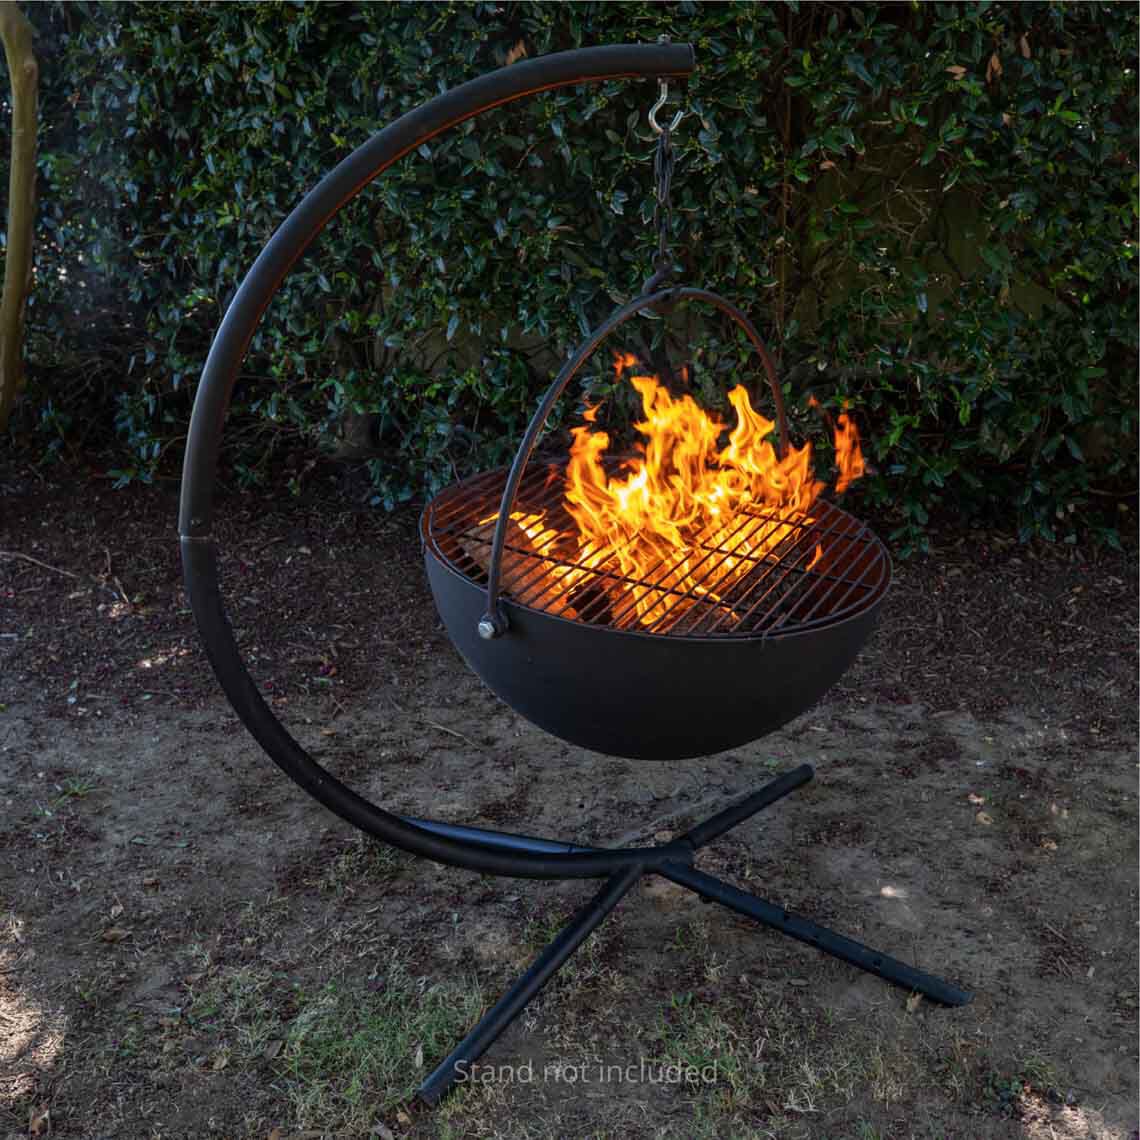 Includes Cauldron Fire Pit Screen Catalina Creations 24 Small Steel Gothic Cauldron Fire Pit Black AD451